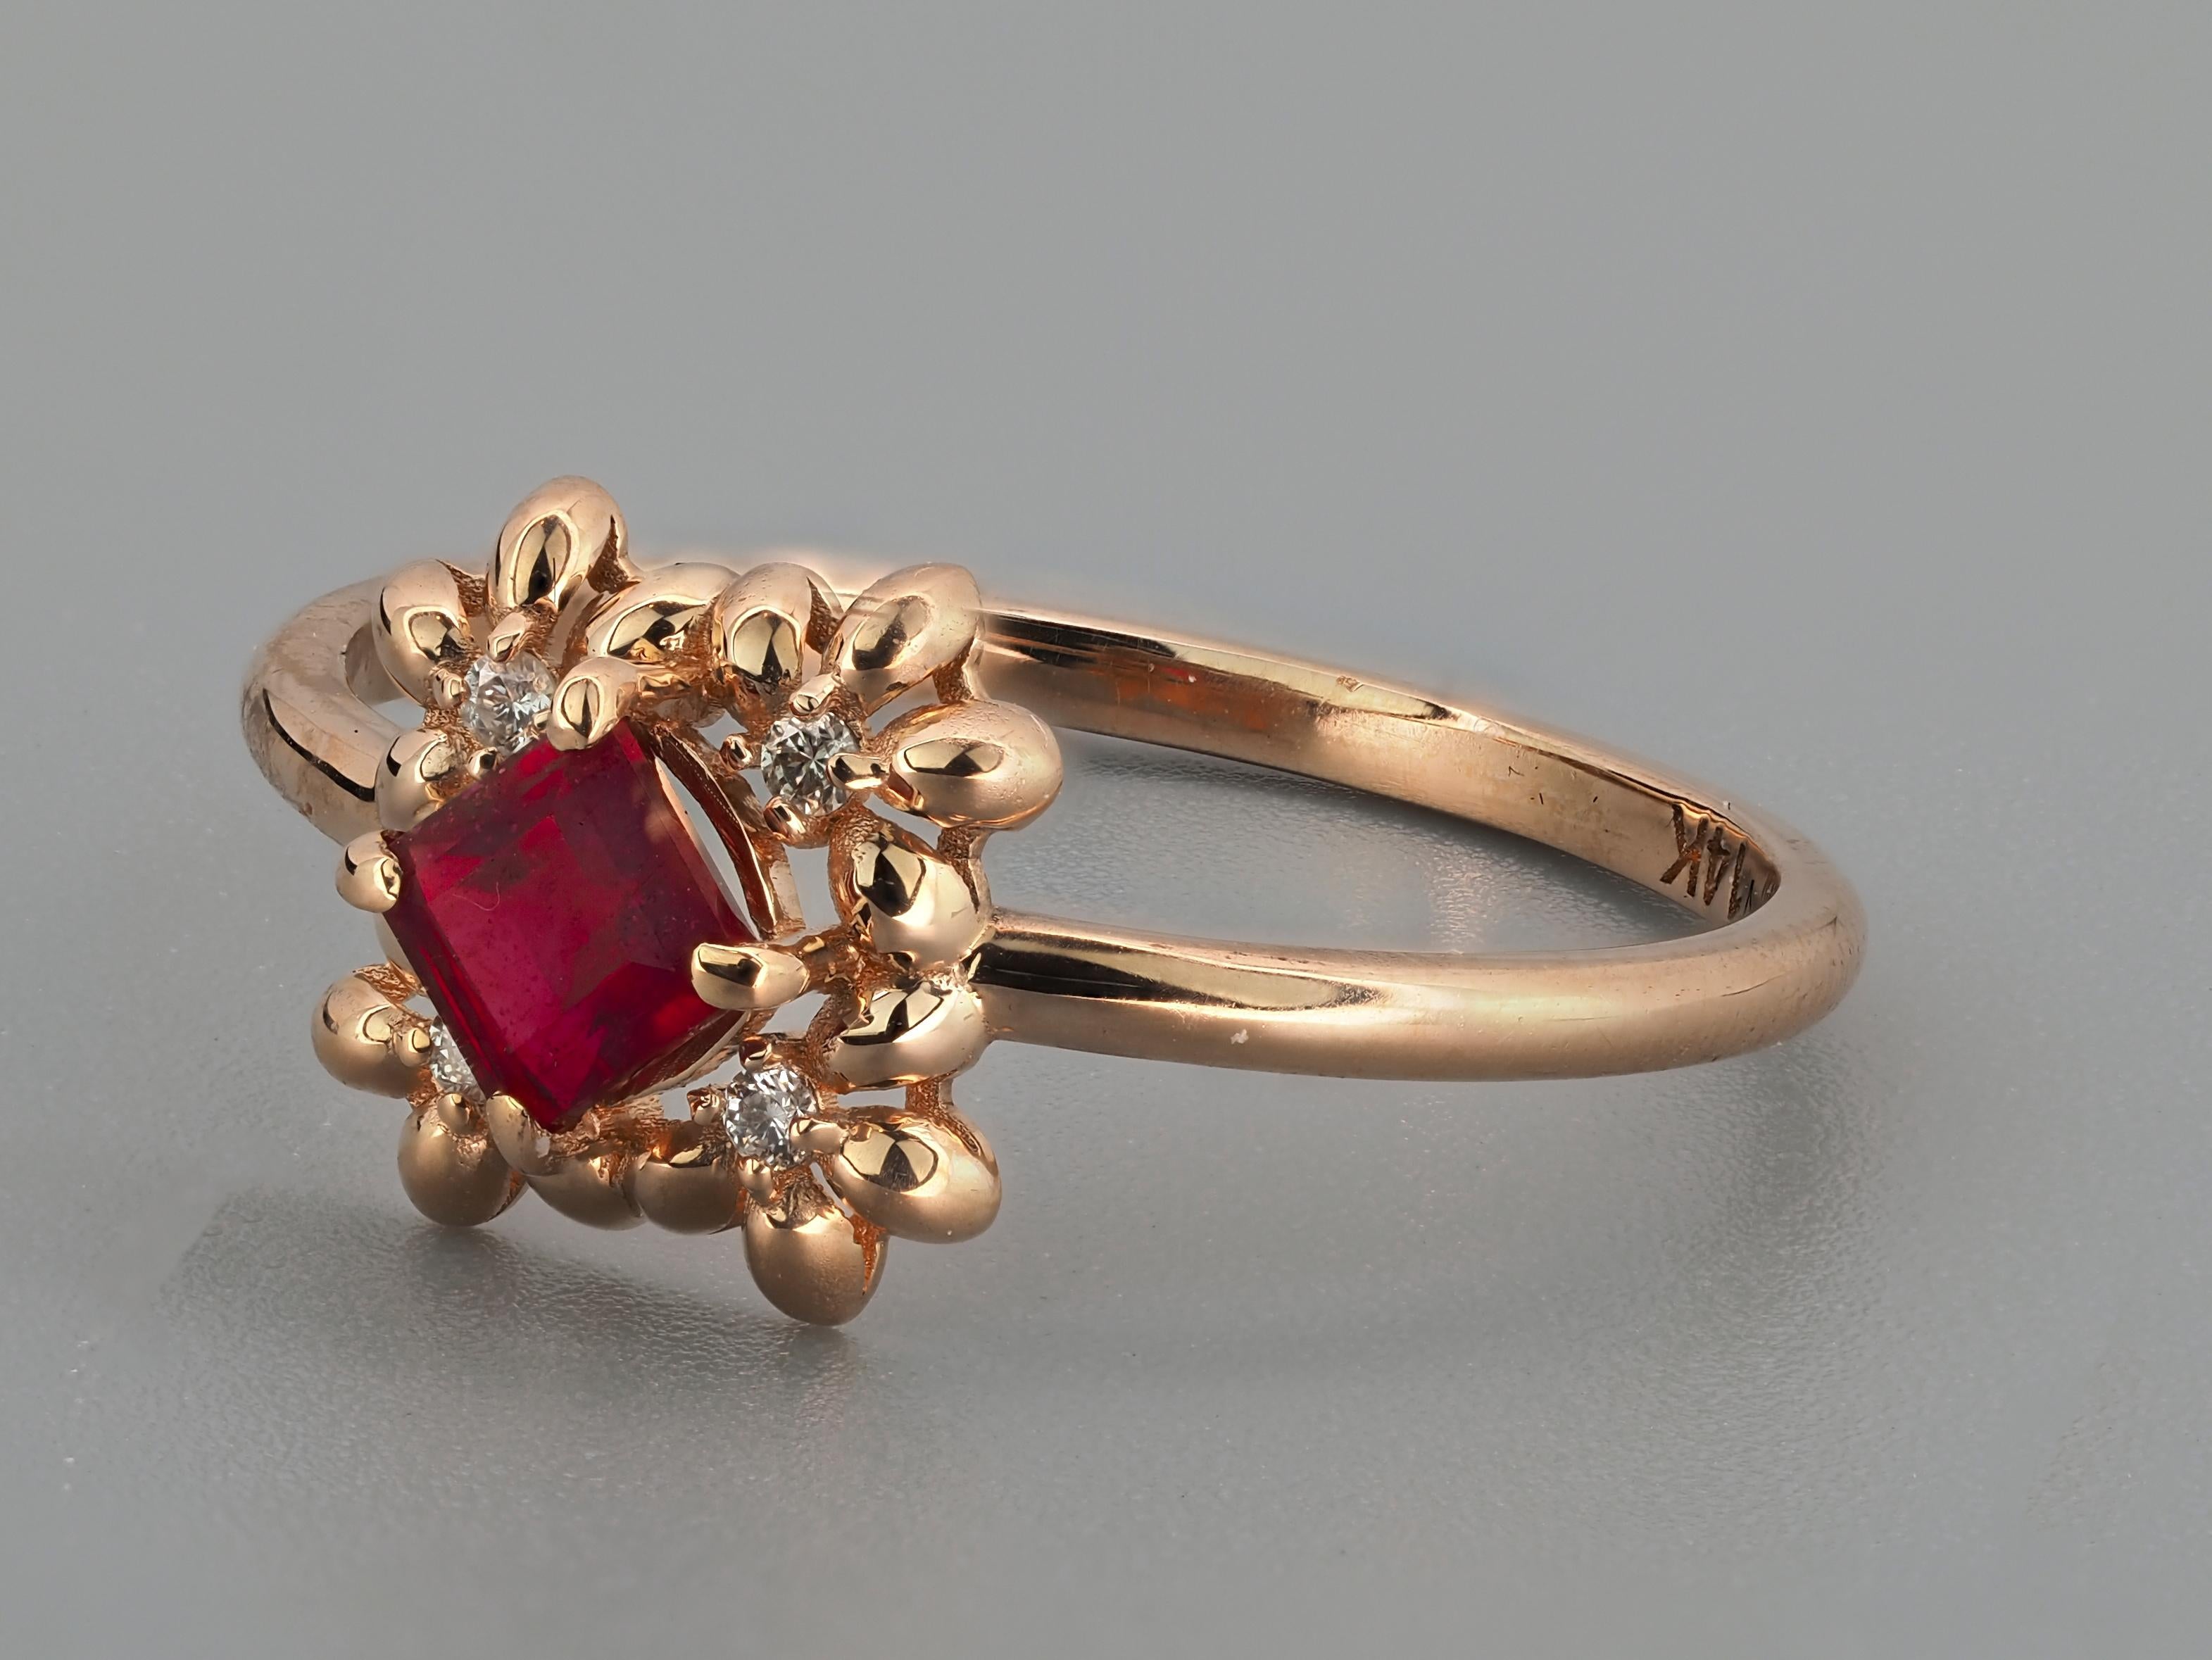 For Sale:  14 karat Gold Ring with Ruby and Diamonds 4